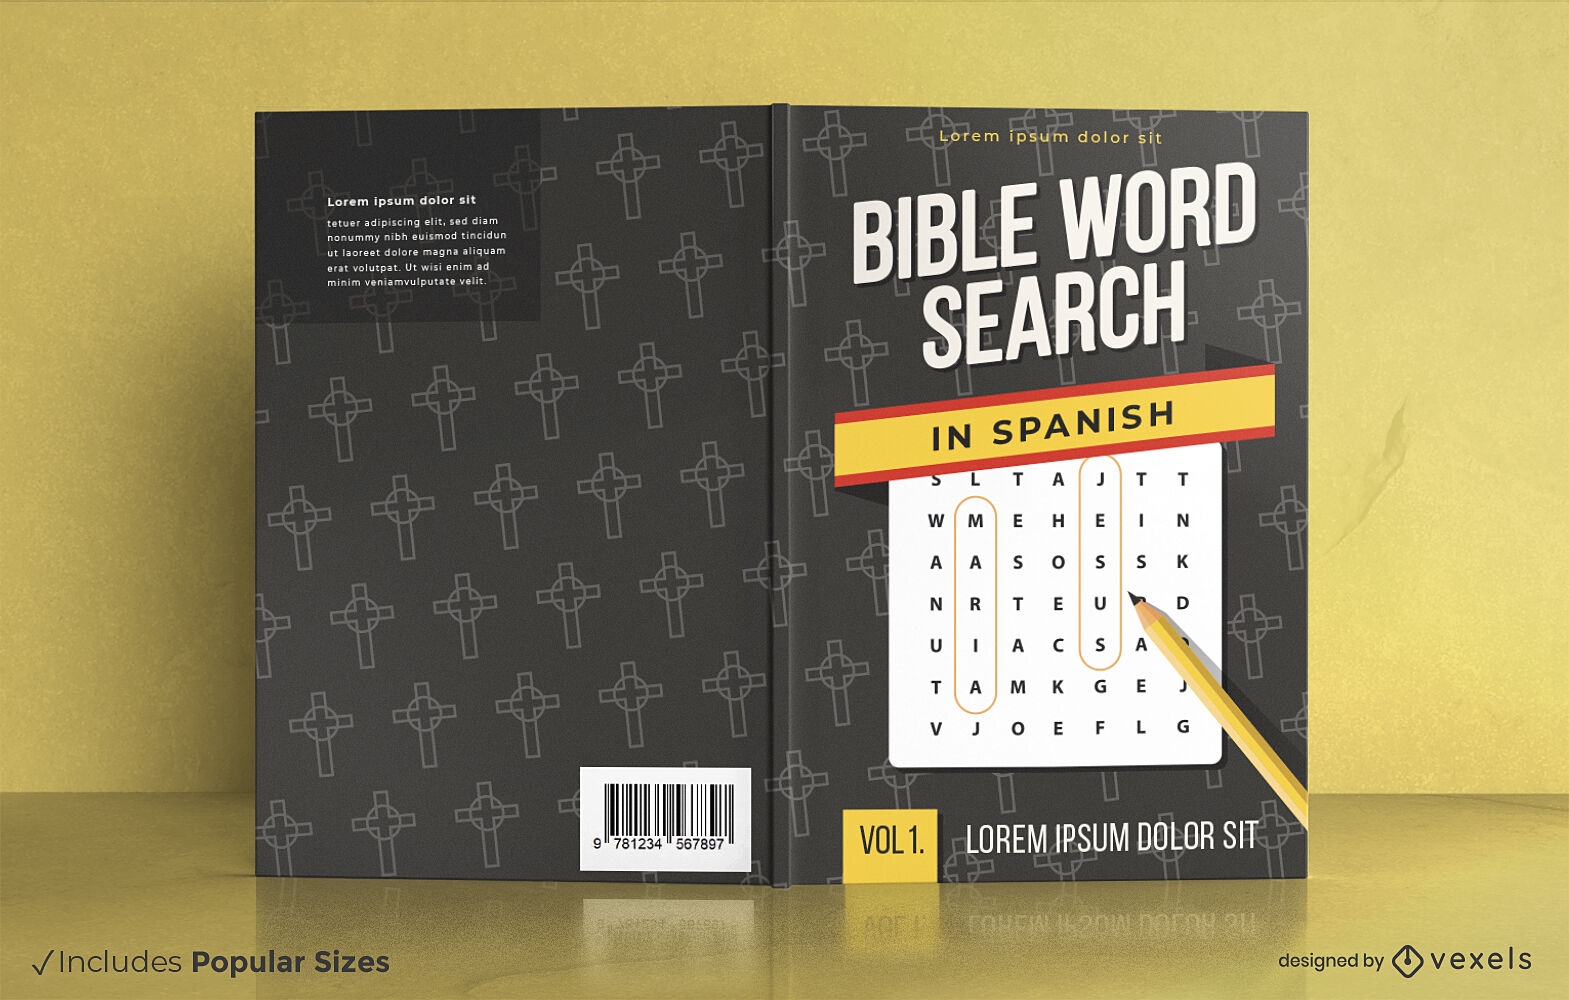 Spanish bible word search book cover design